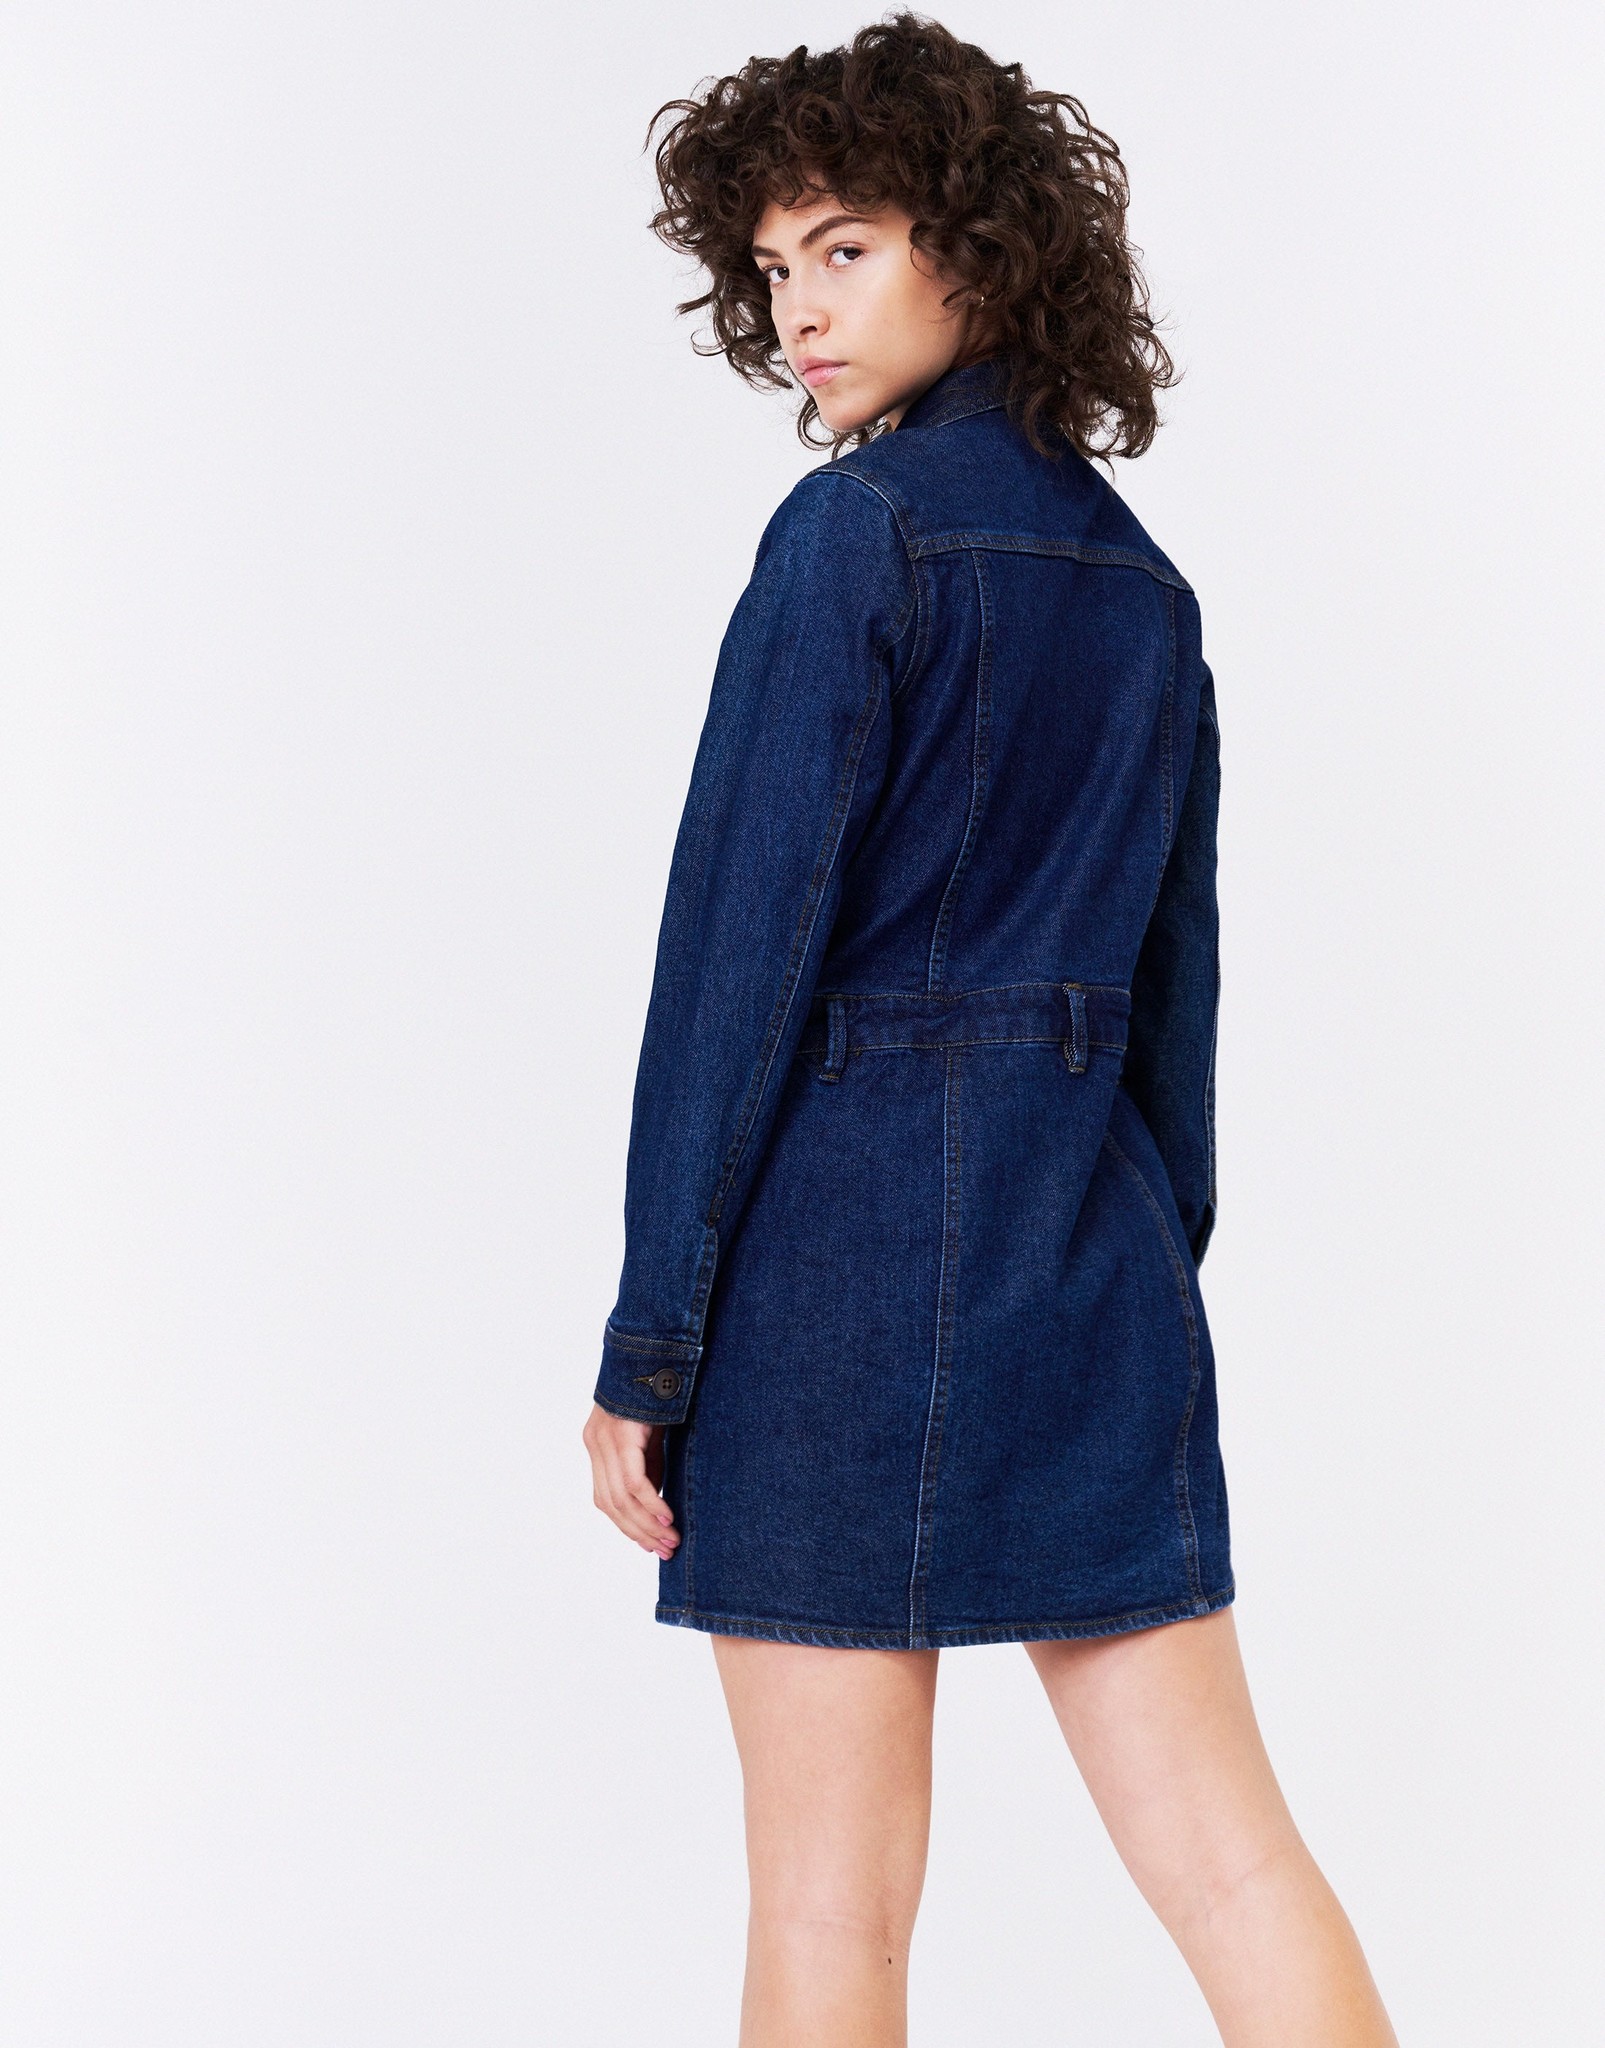 Unpublished Penny Convertible Denim Dress Jacket in Classic